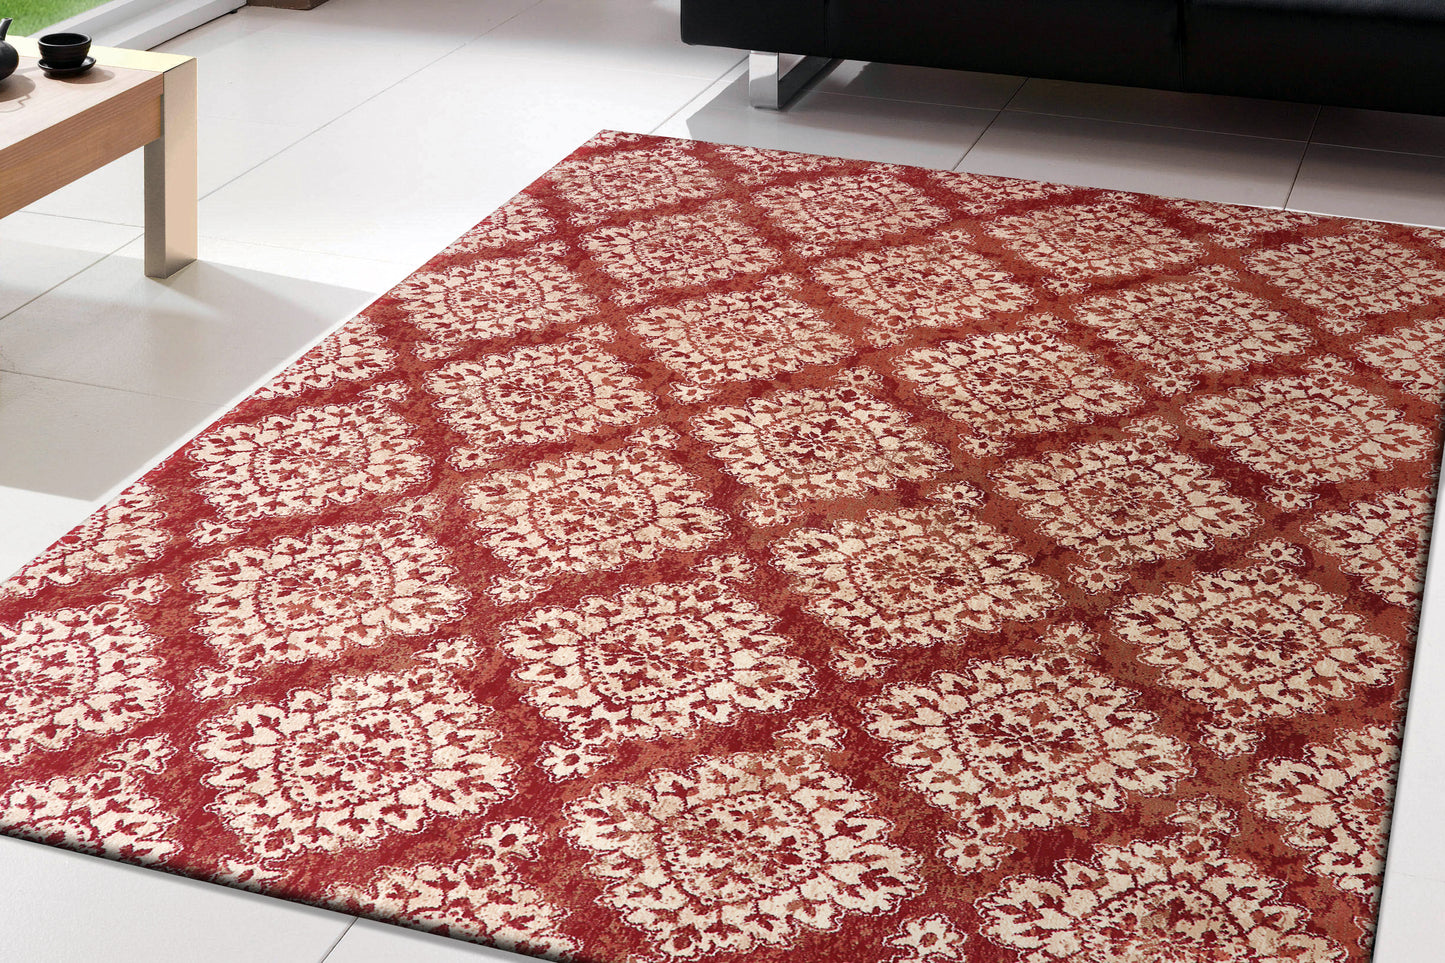 Melody 985015-619 Terracotta Area Rug